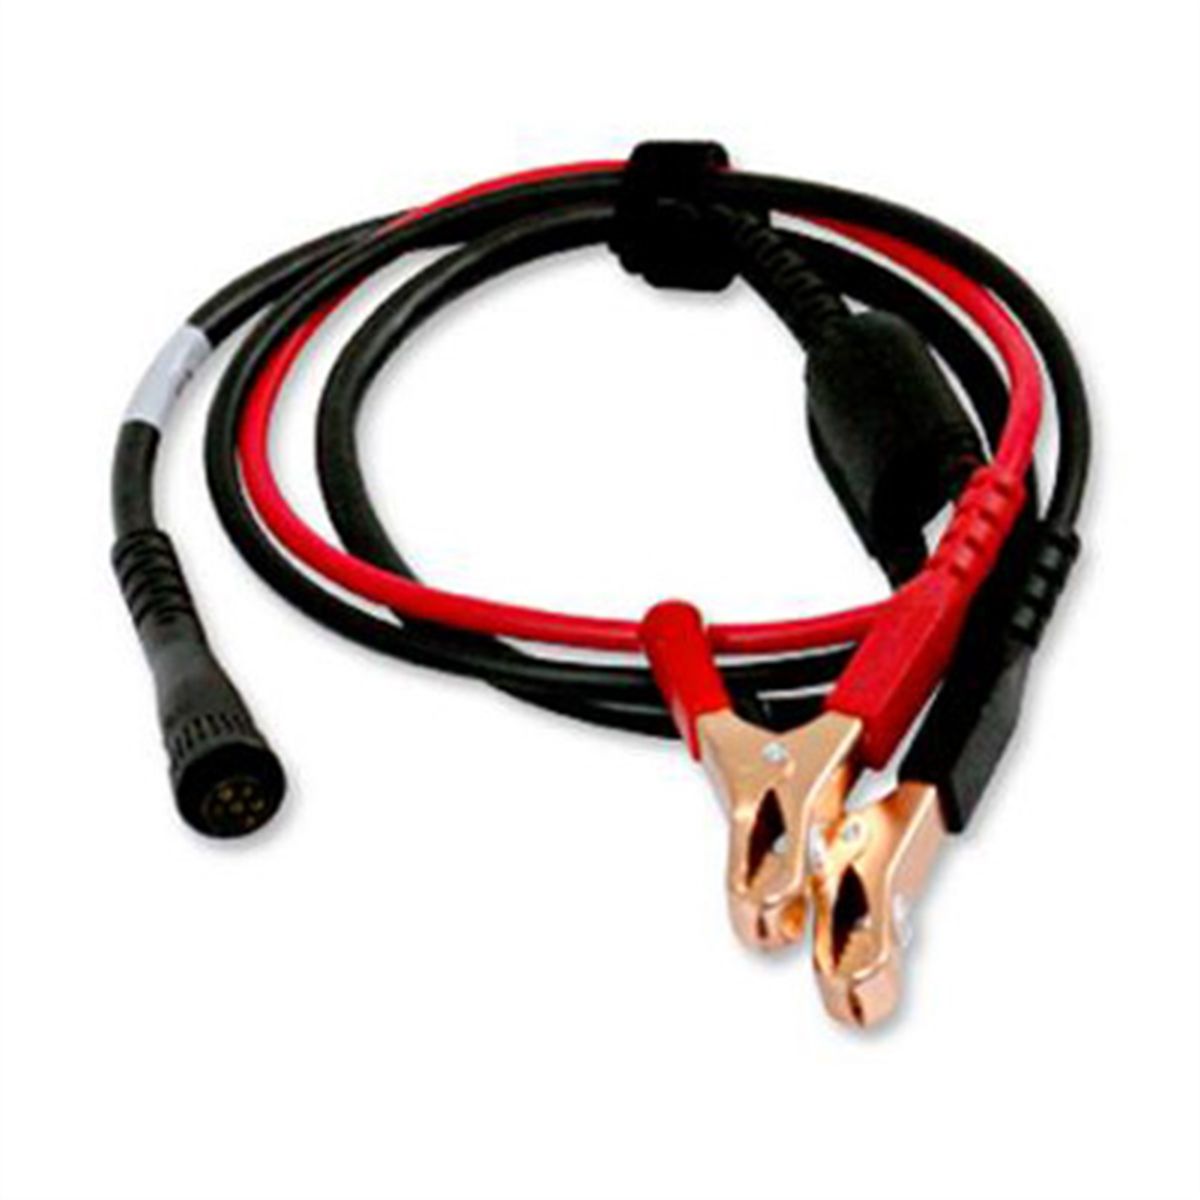 Cable for EXP-1000, 500XL - 4 Ft